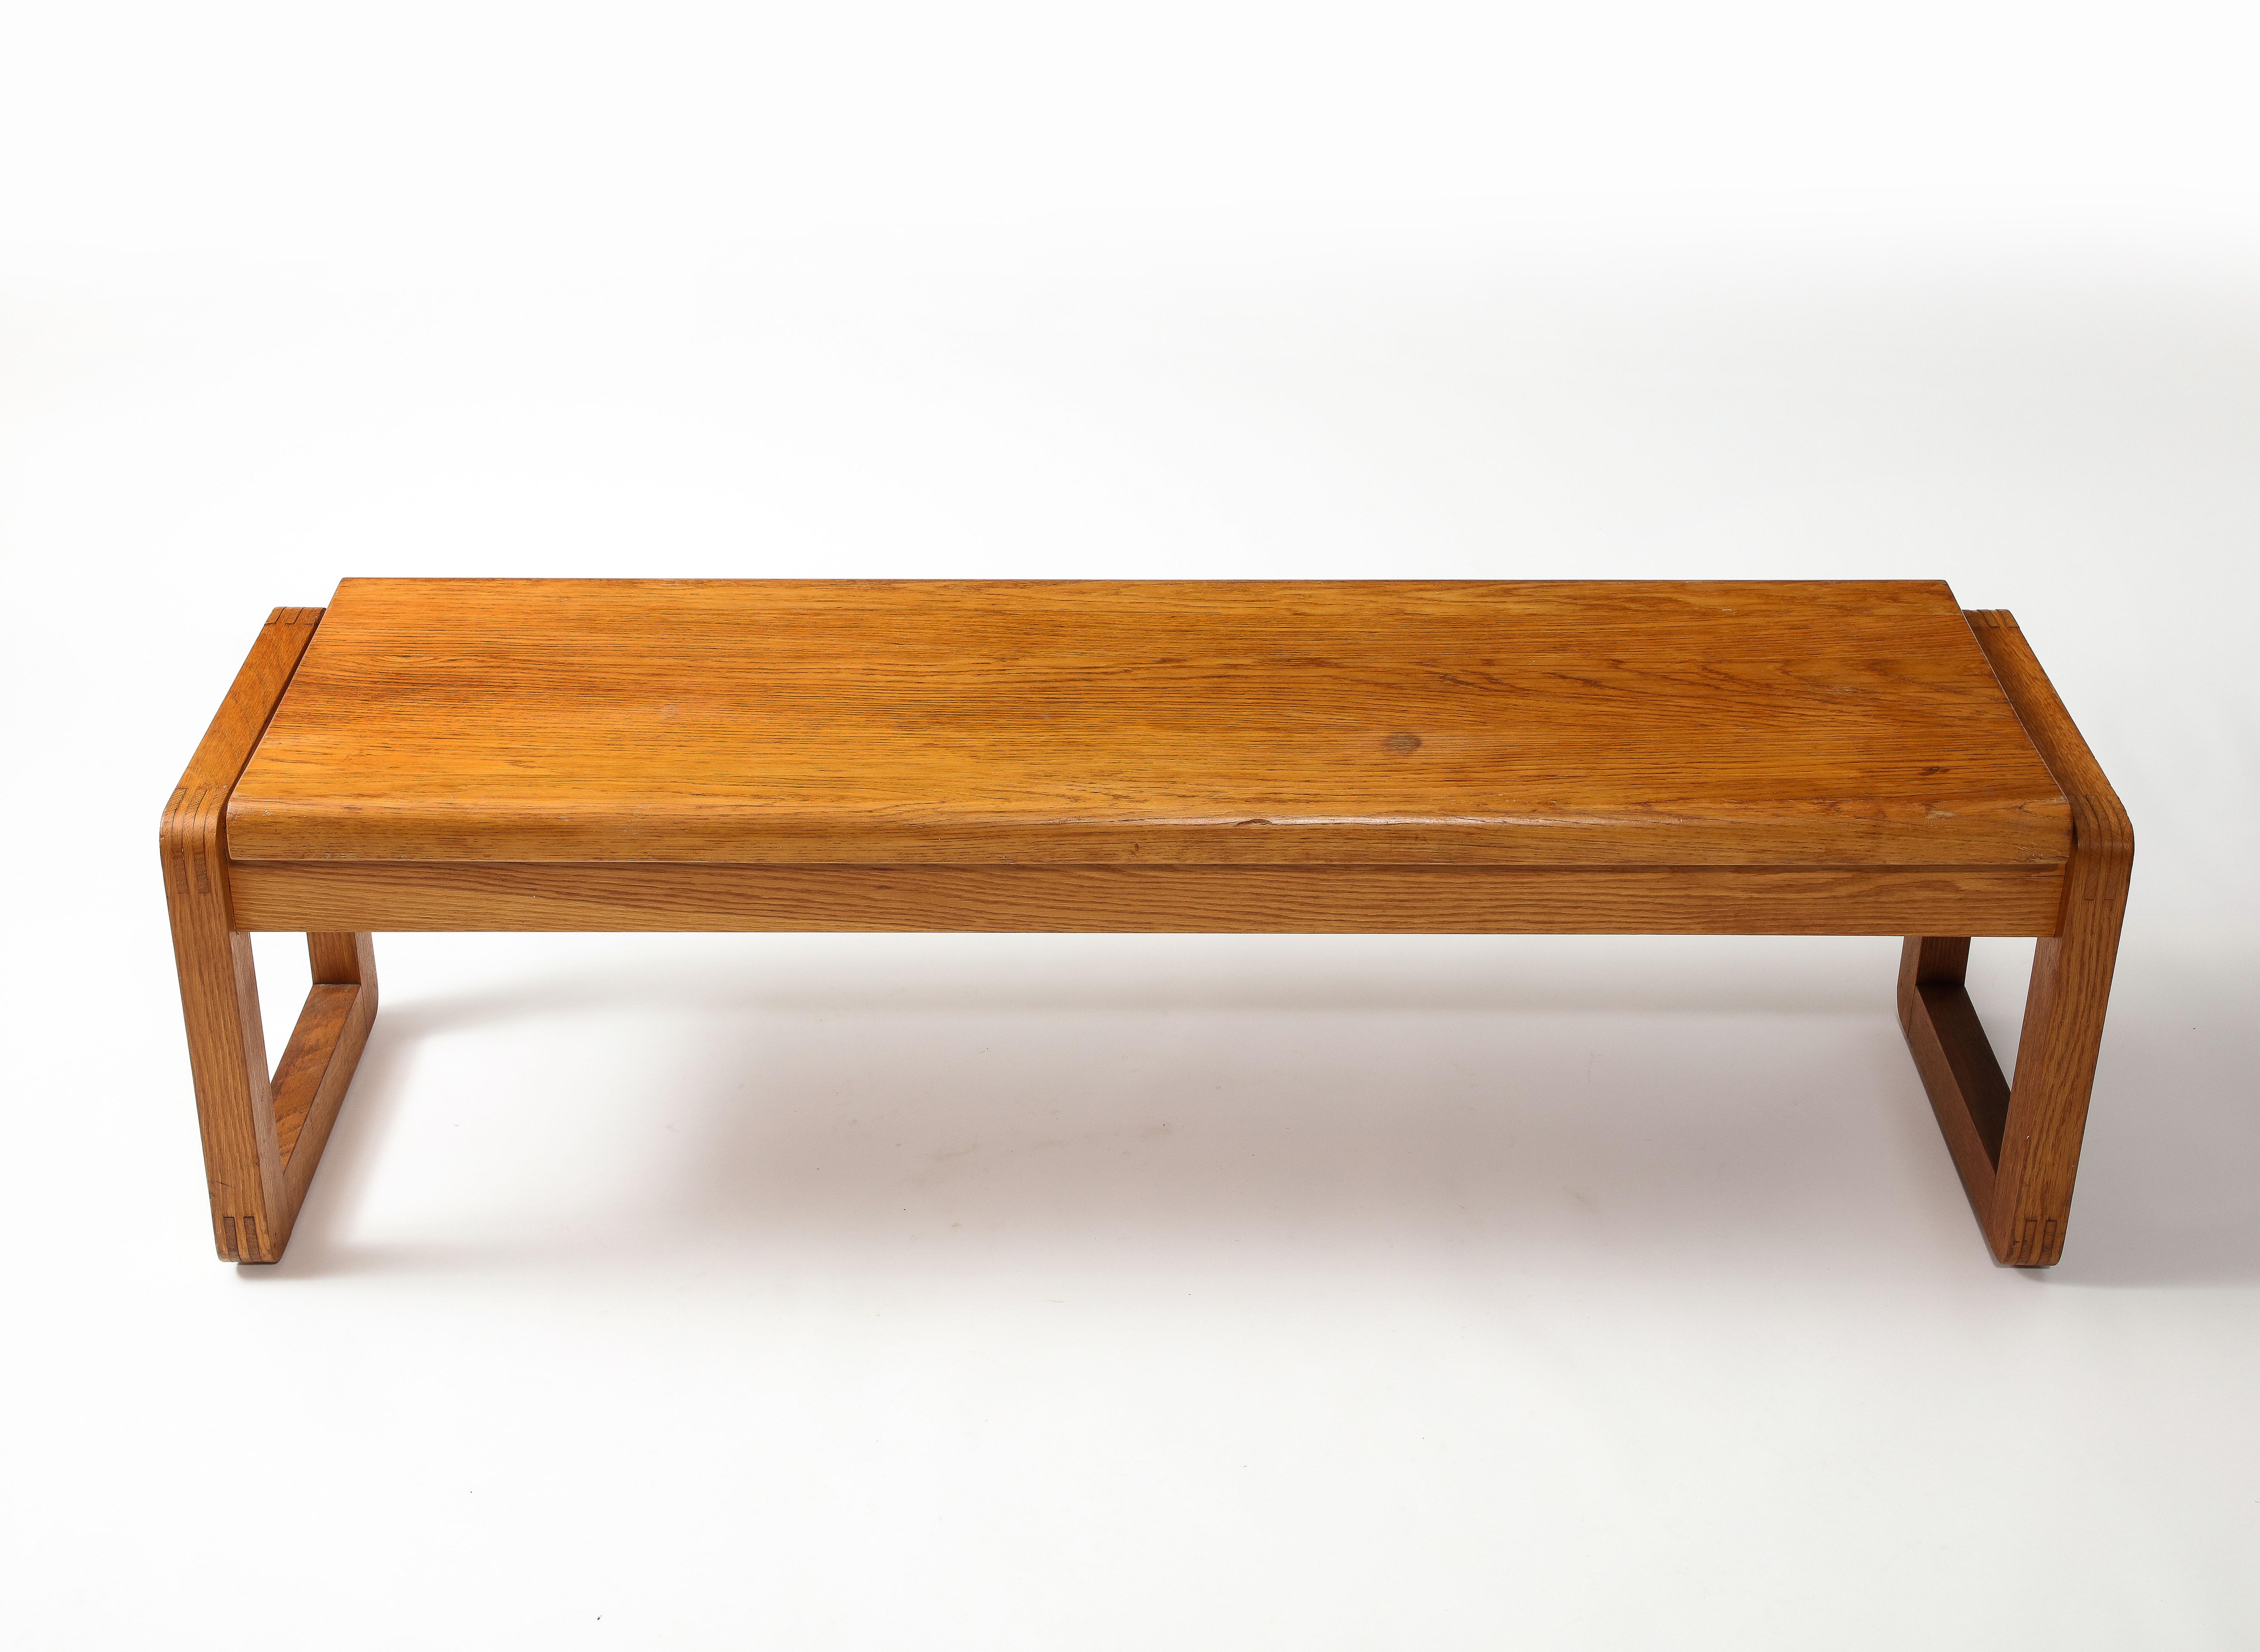 Minimalist Solid Oak Bench in style of Guillerme & Chambron  - Netherlands 1970s In Good Condition For Sale In New York, NY